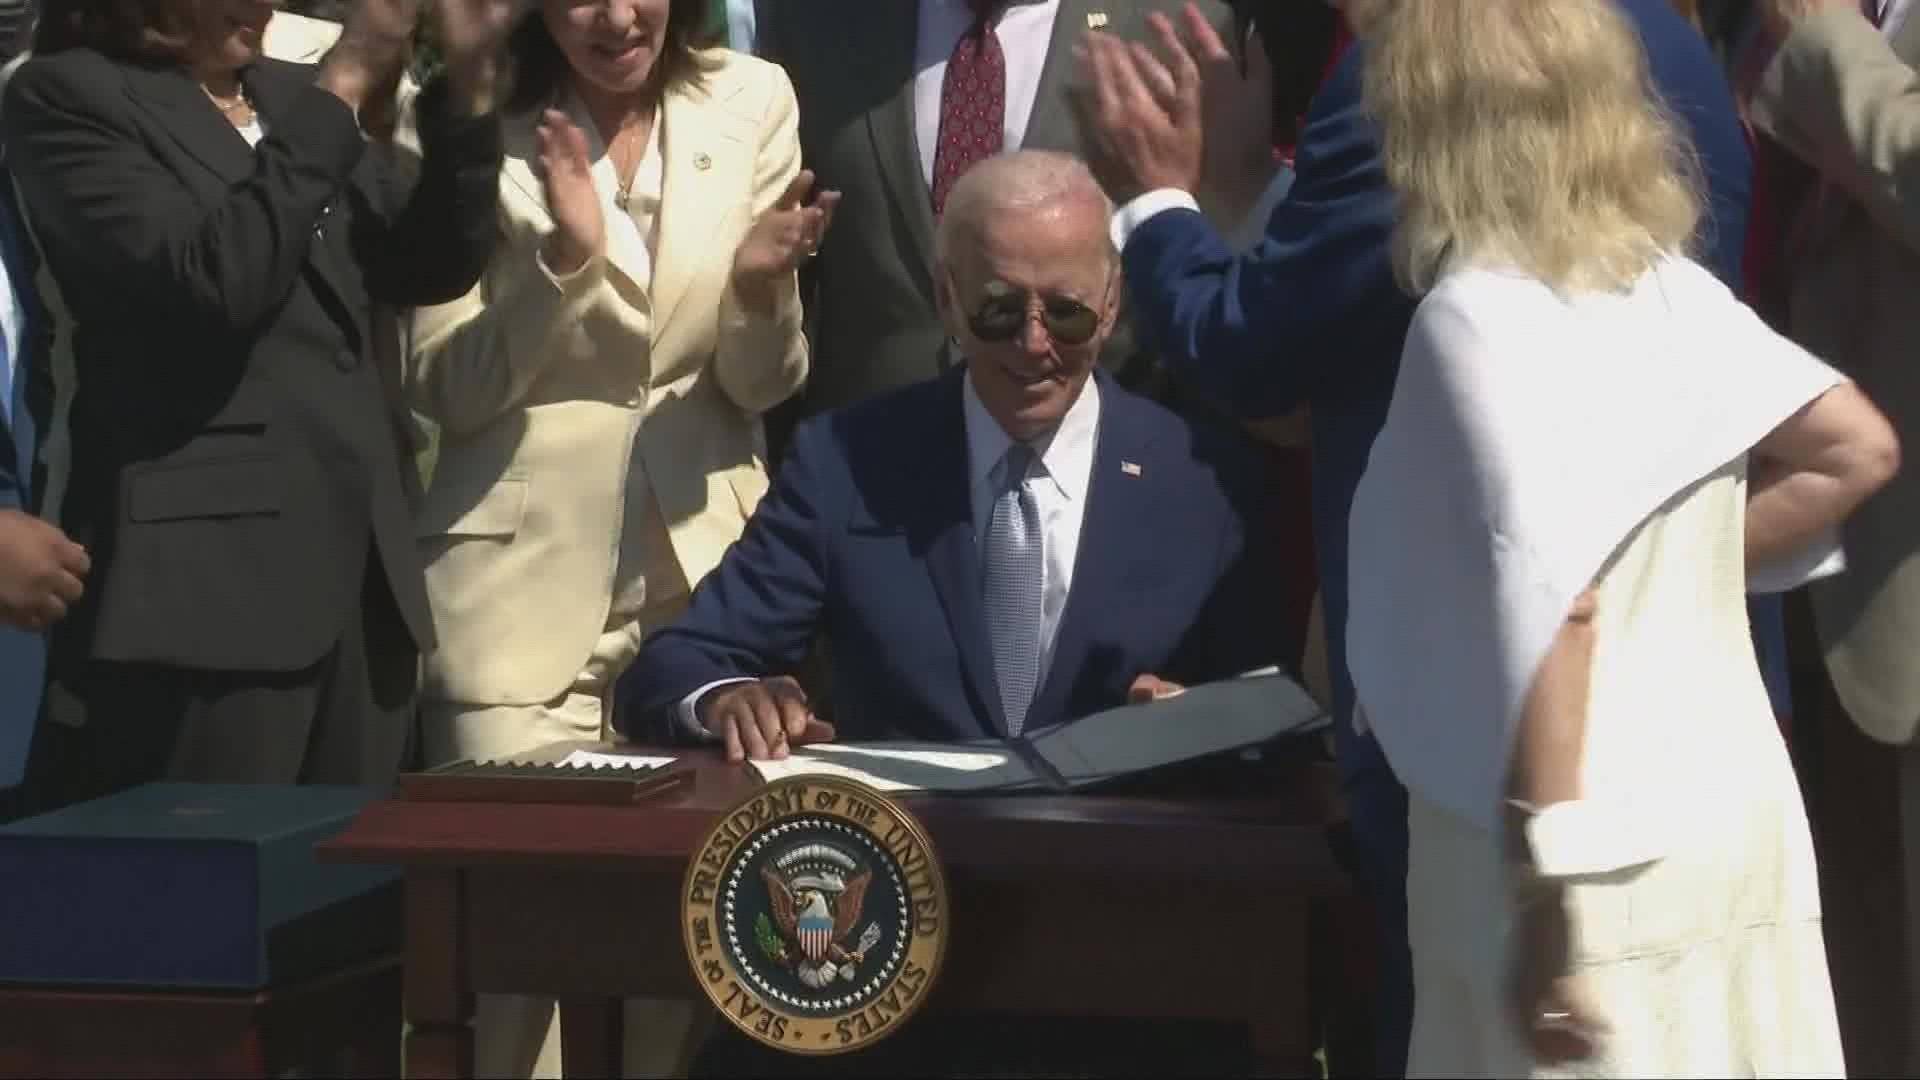 Biden signed a $280 billion bipartisan bill to boost domestic high-tech manufacturing, part of his administration's push to boost U.S. competitiveness over China.